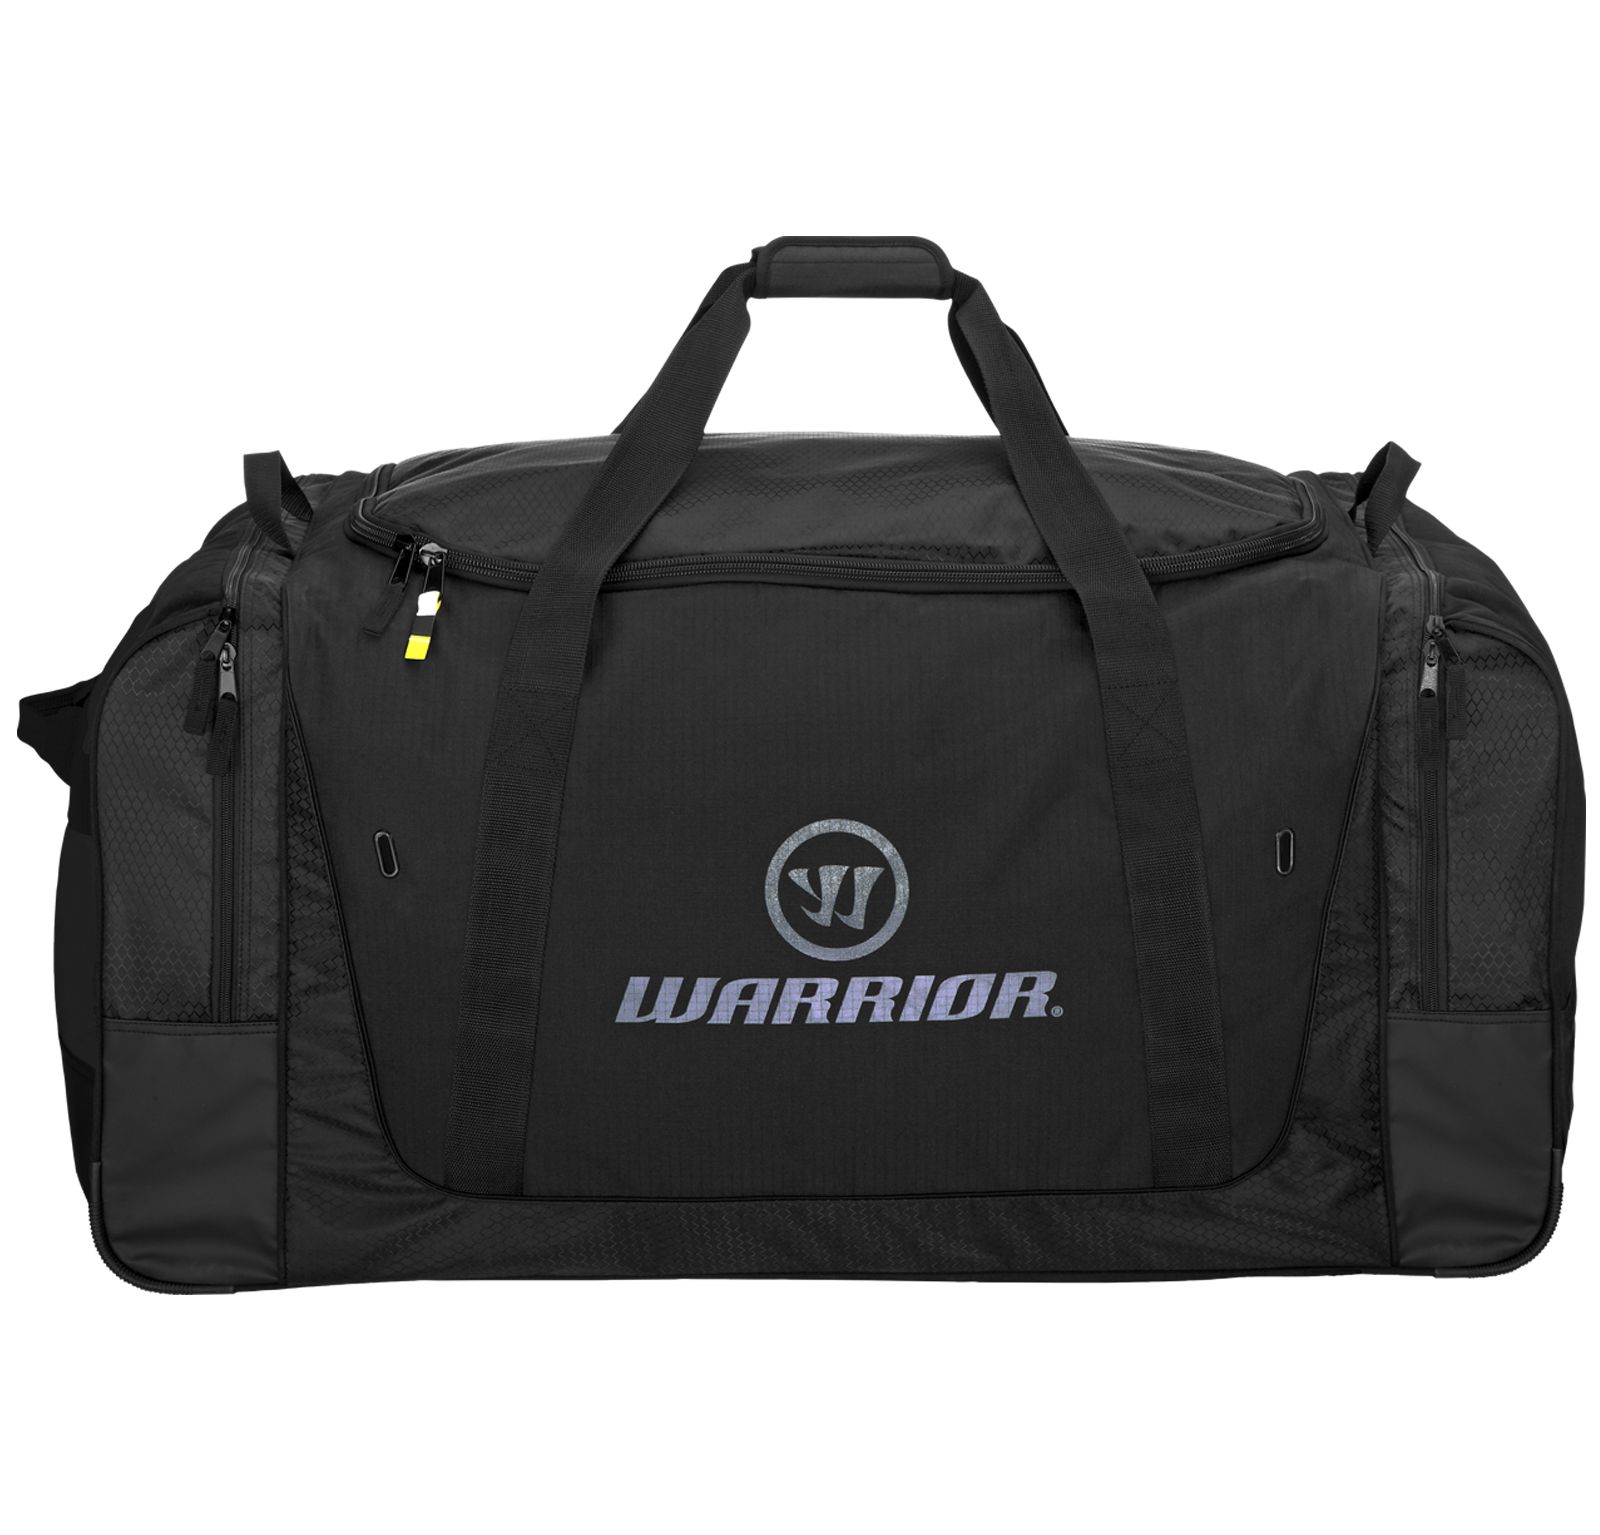 Q20 Cargo Carry Bag, Black with Grey image number 0